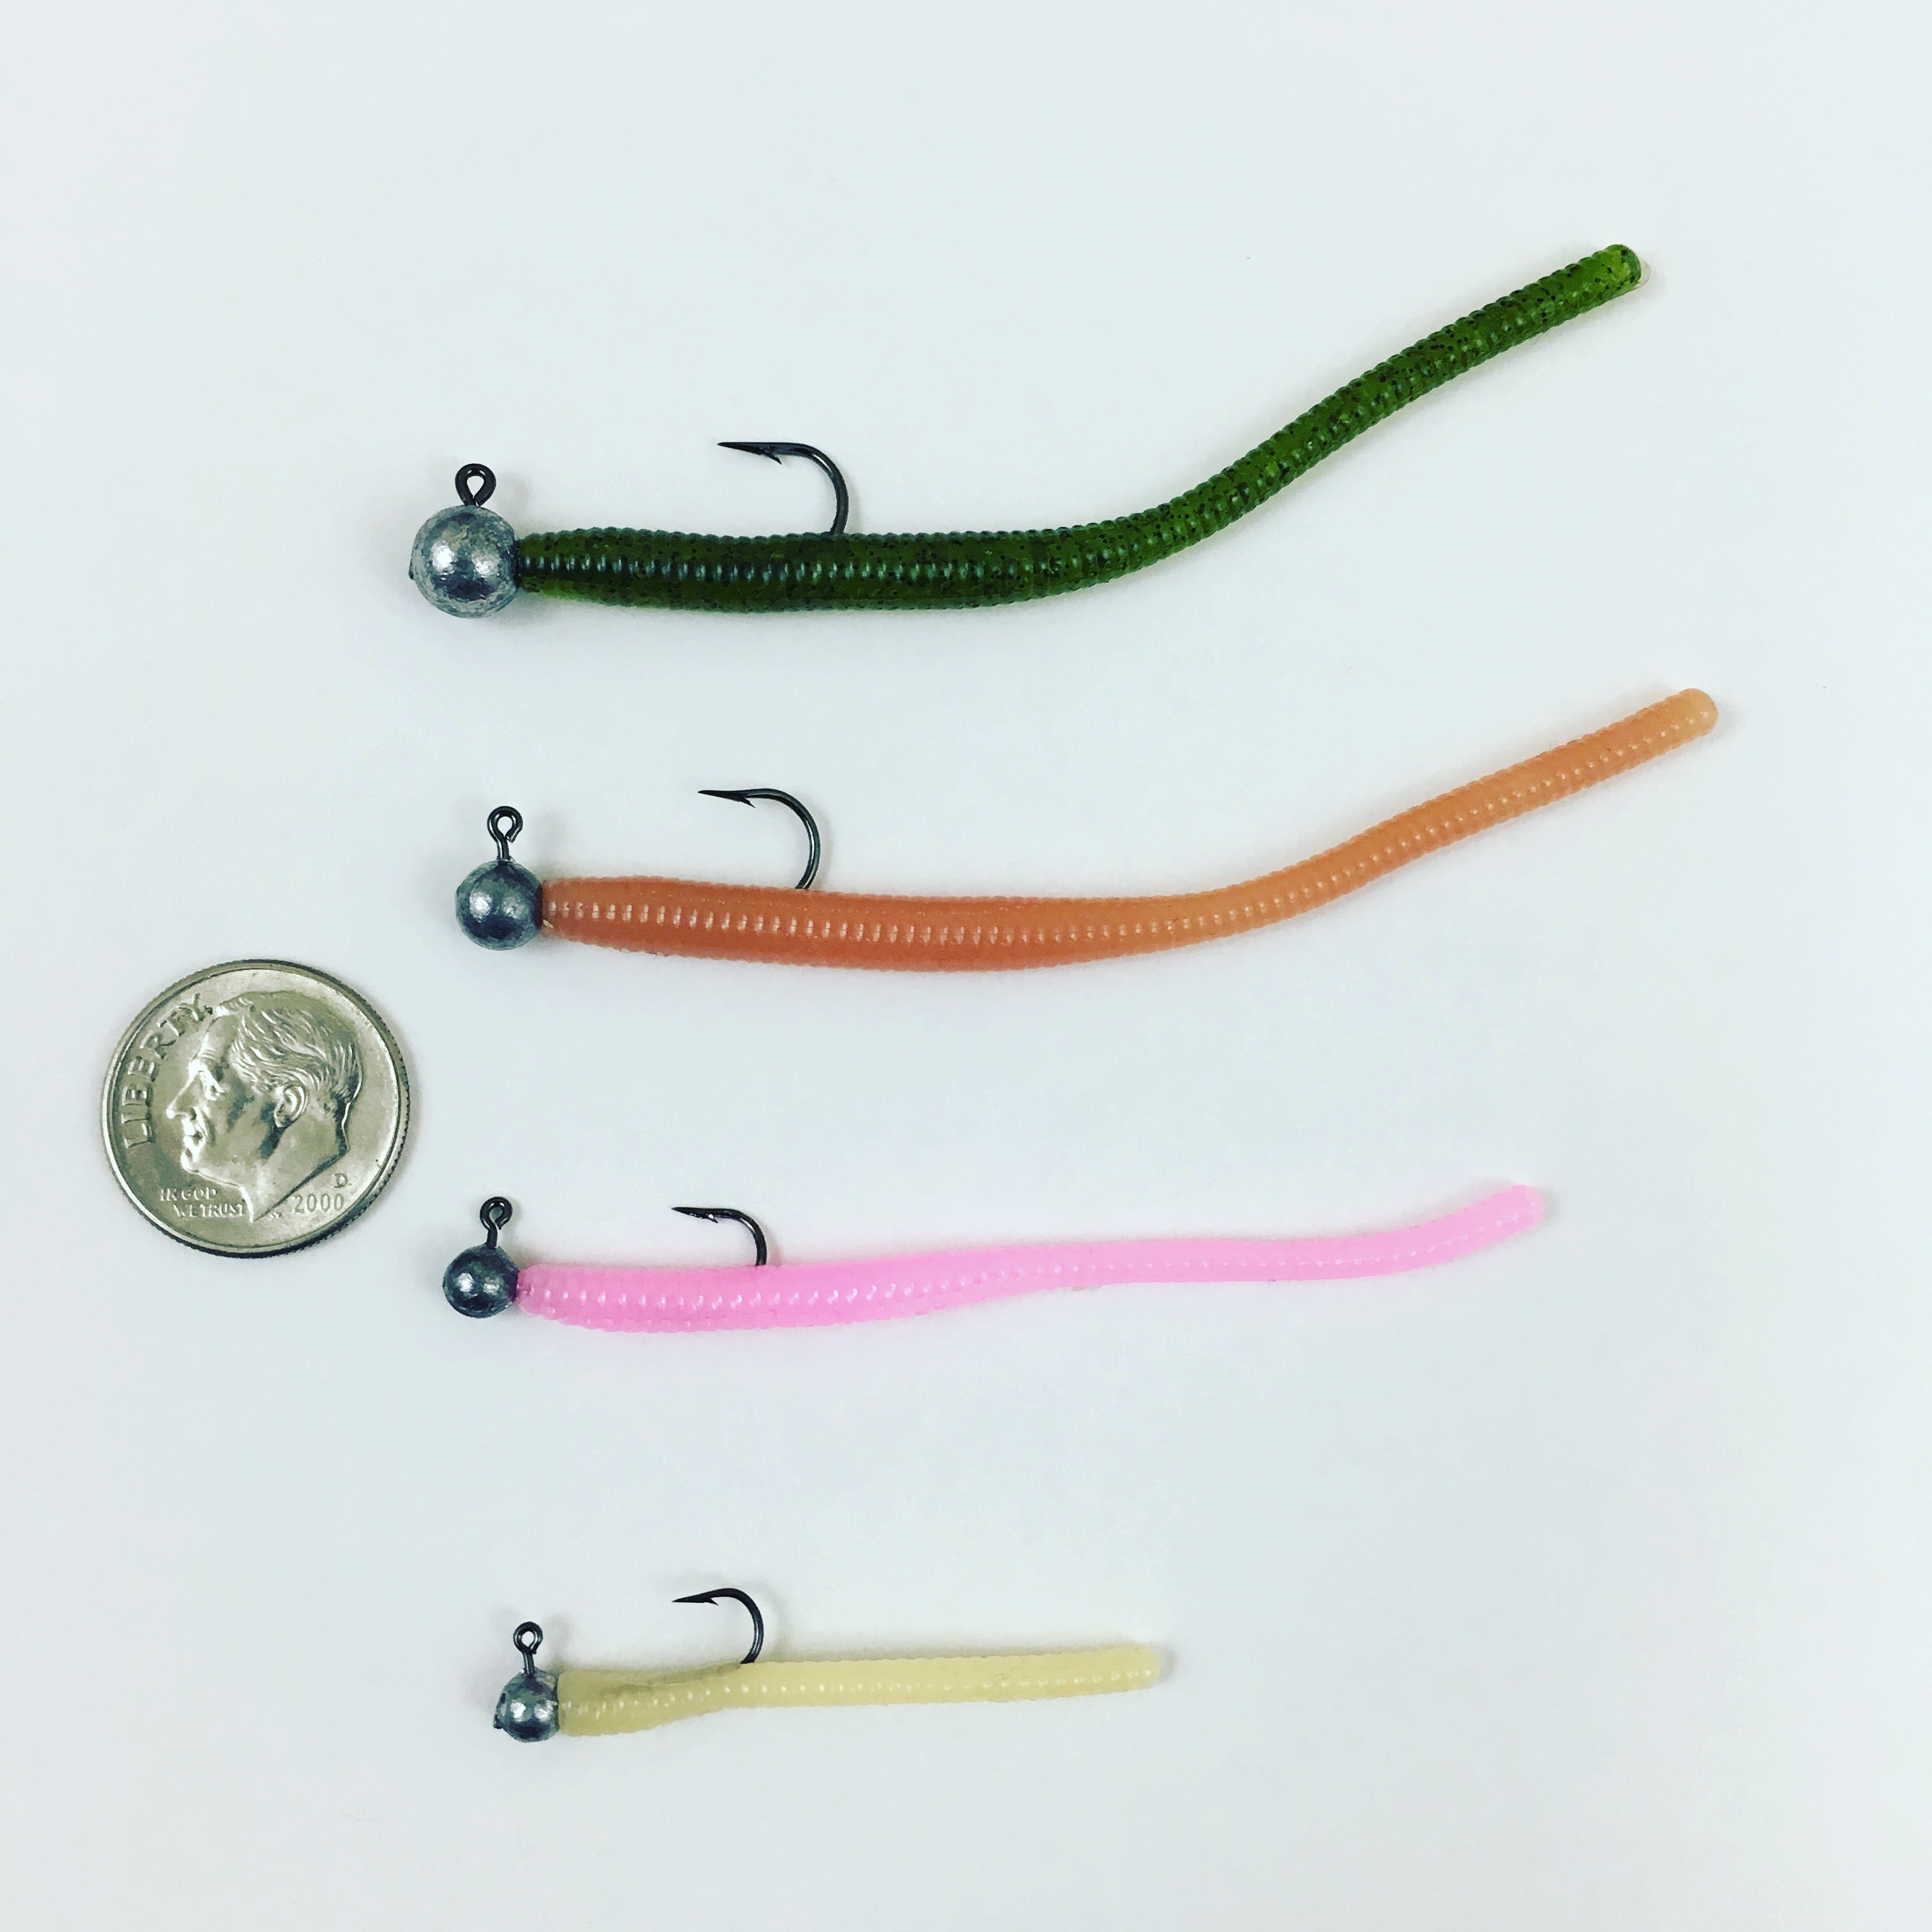 Anglers Sport Center - Our current live bait: - Jumbo Bloodworms -  Bloodworms - Razor Clams - Minnows - Troutworms - Nightcrawlers - Green  Nightcrawlers - Googan Worms with plenty of fresh